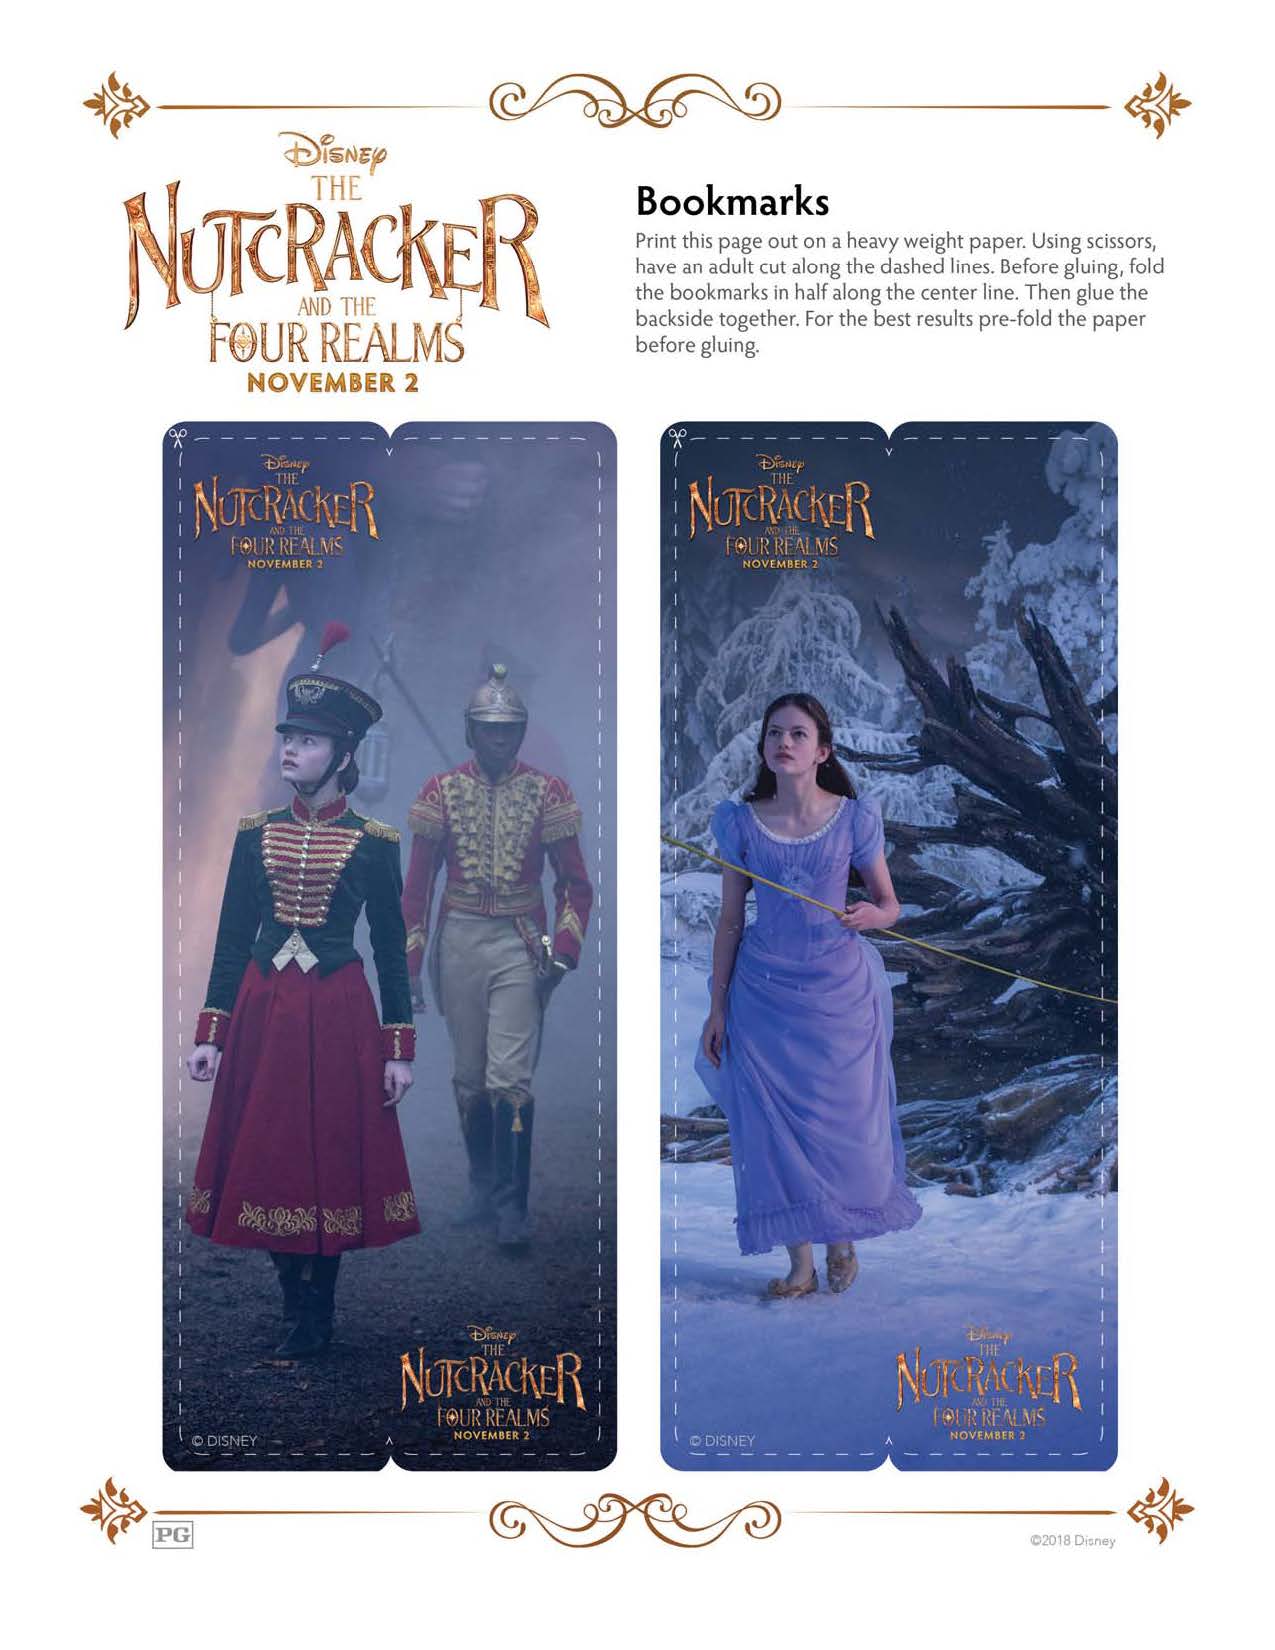 Make Bookmarks - The Nutcracker and The Four Realms Coloring Pages and Activity Sheets